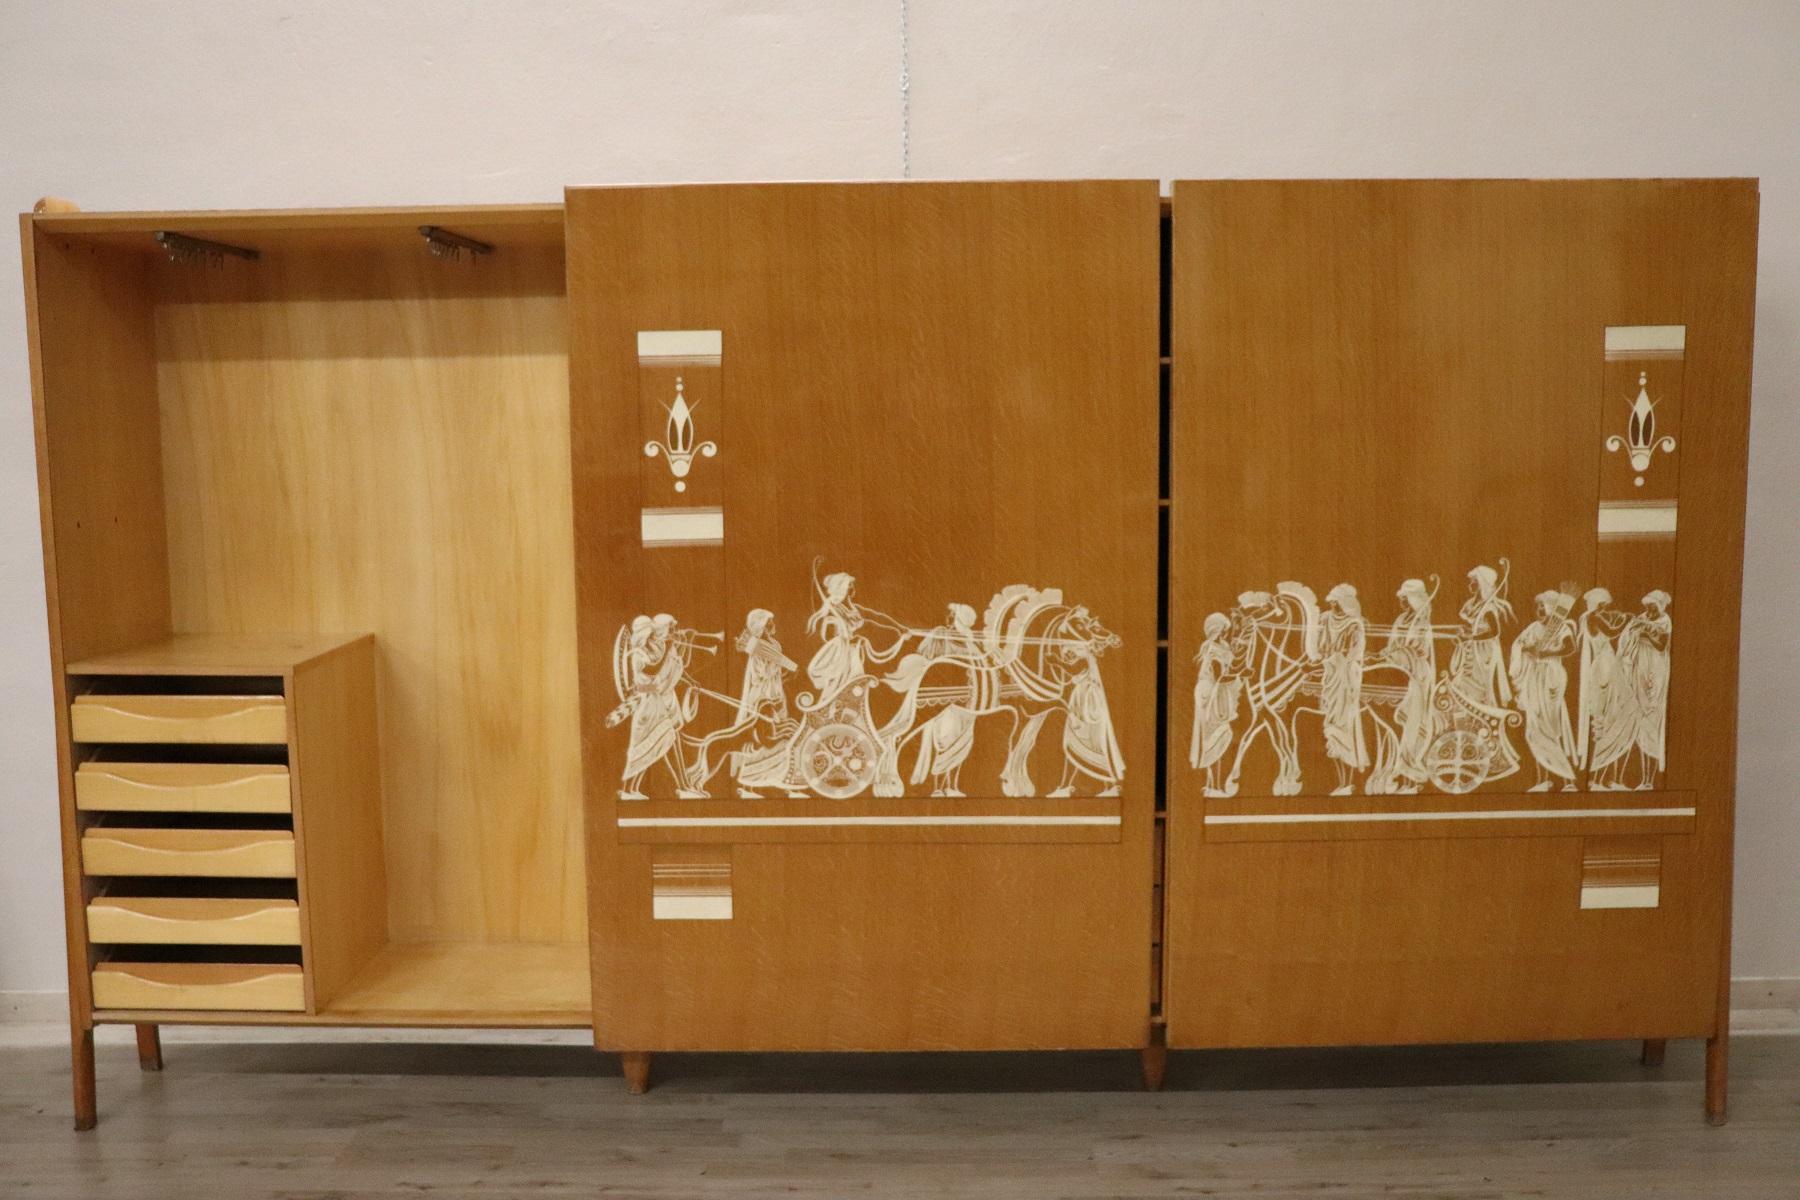 Spectacular large Italian design wardrobe from the 1960s. Large size with two sliding doors, large useful space with internal drawers. The wardrobe is characterized by a splendid hand painted decoration on the doors. A ancient Romans inspired hand